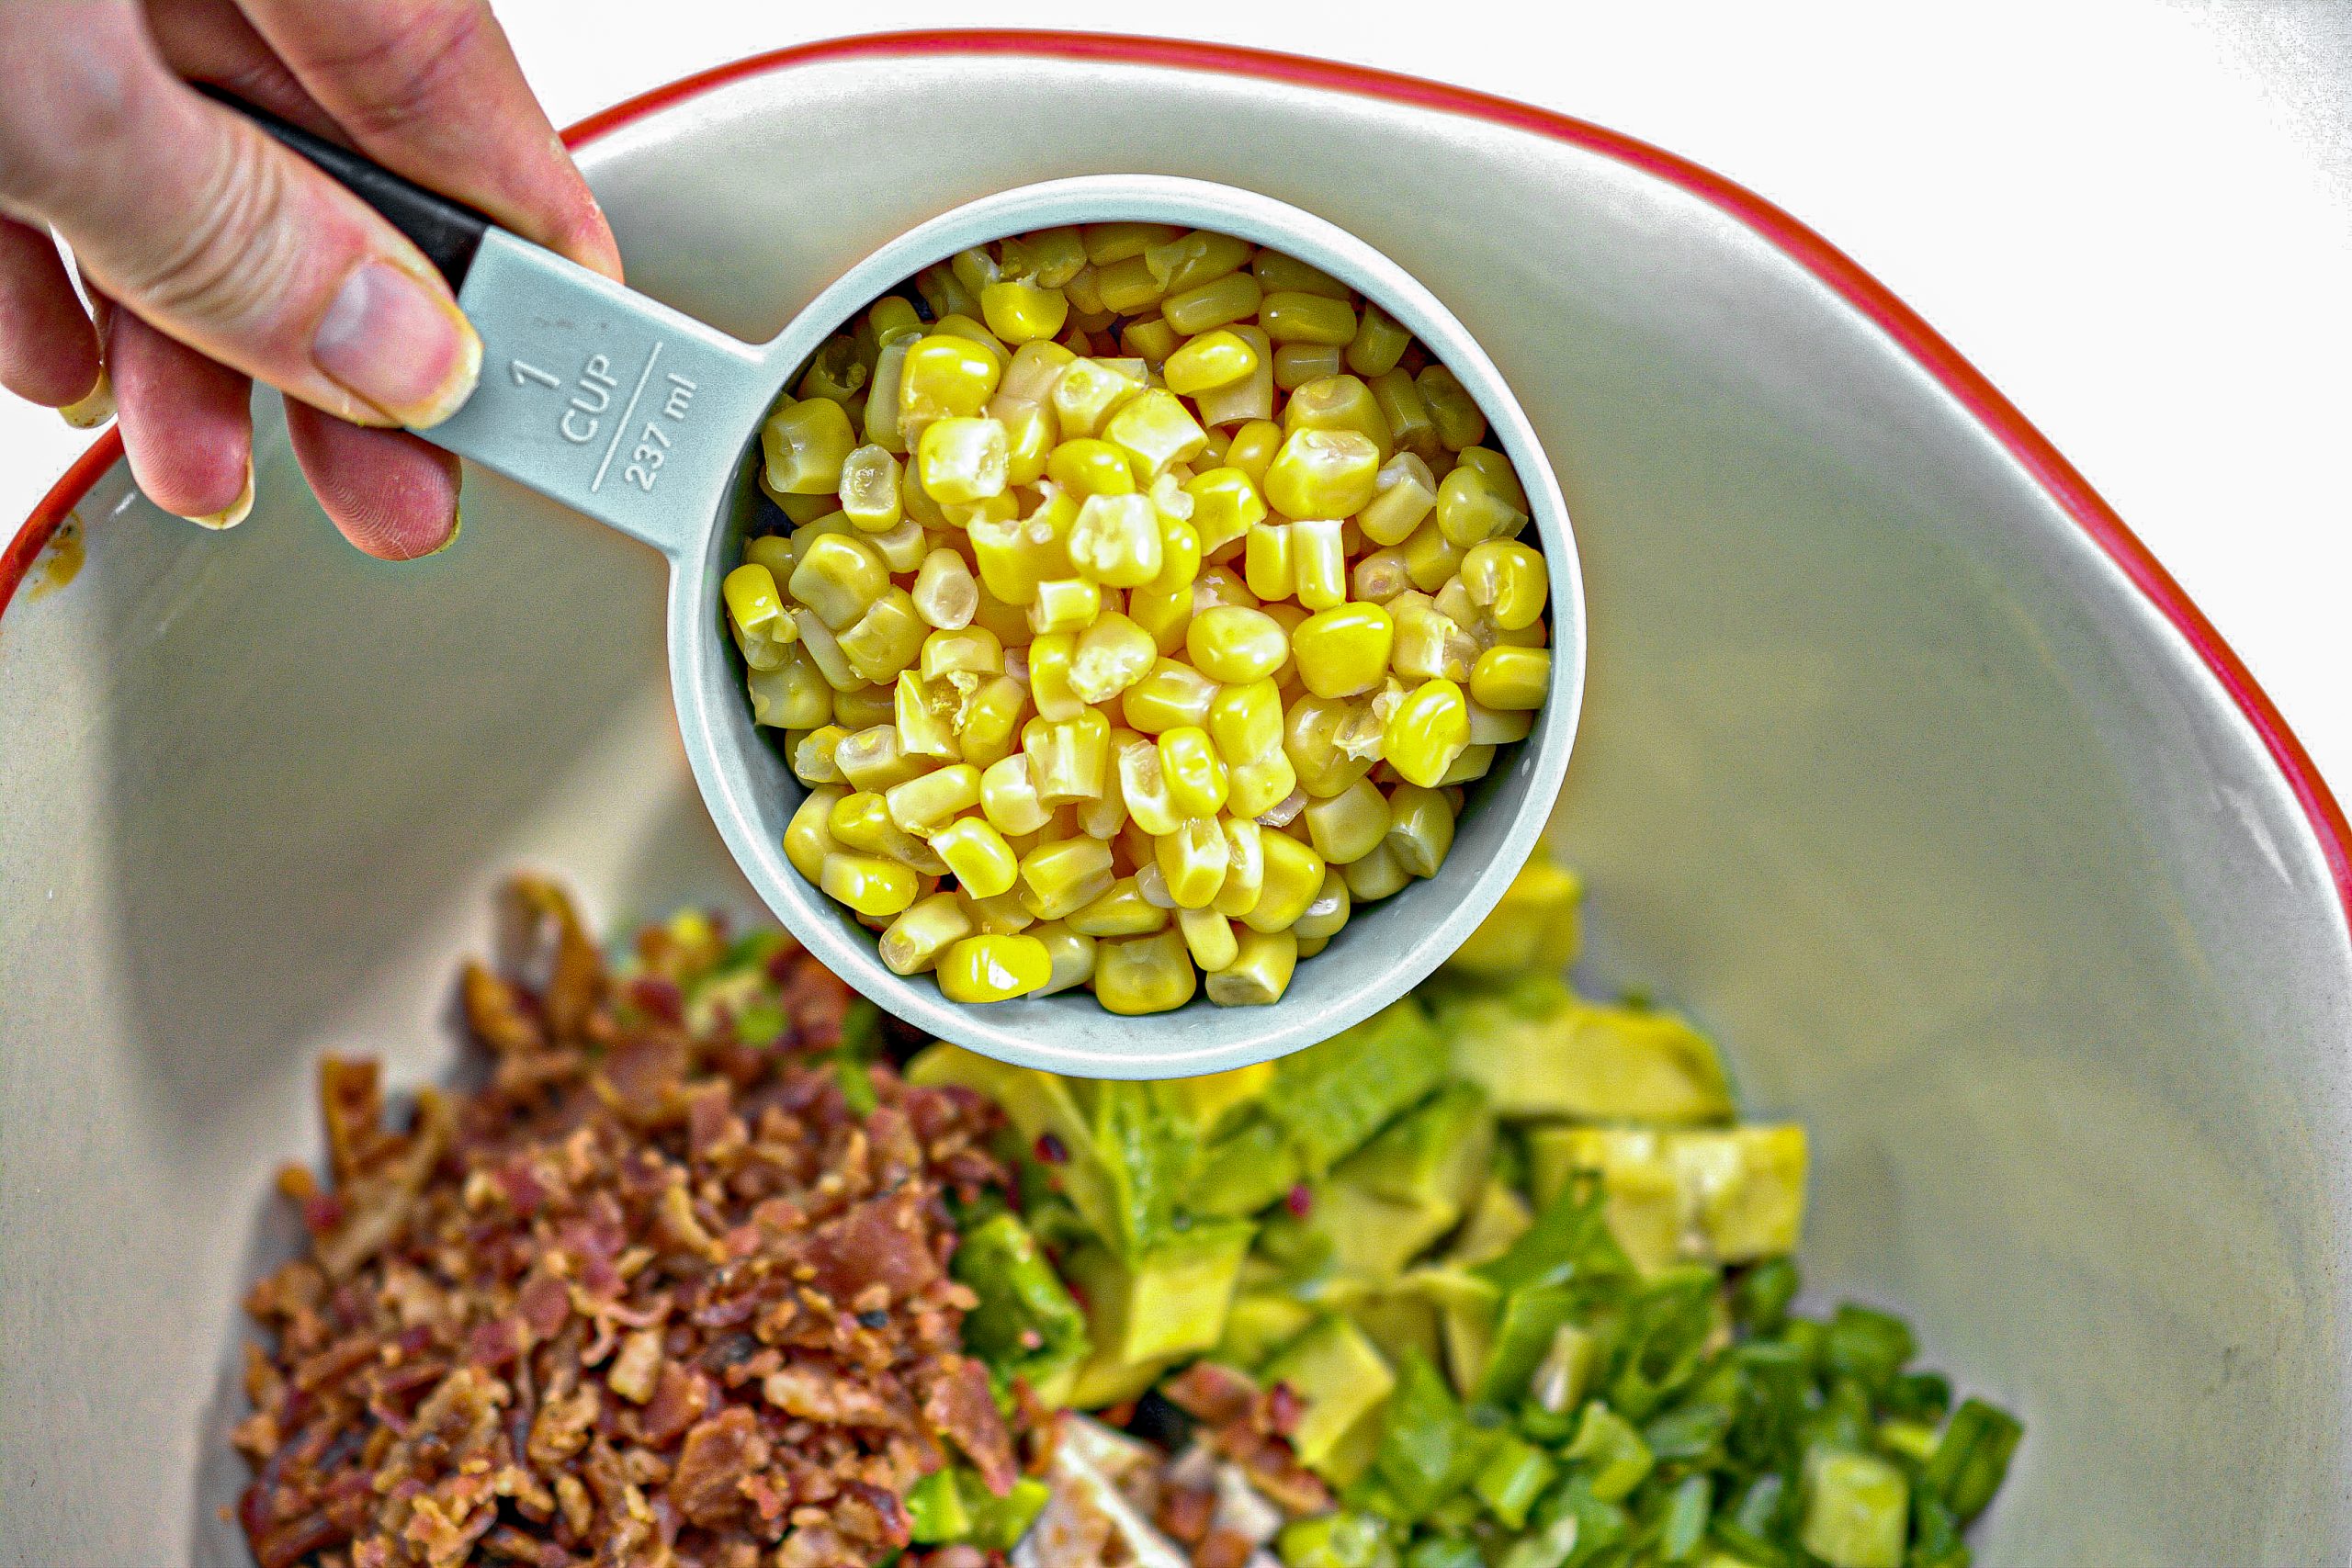 In a large mixing bowl, combine the chicken, chopped avocado, corn, green onion, bacon crumbles, dill and parsley.